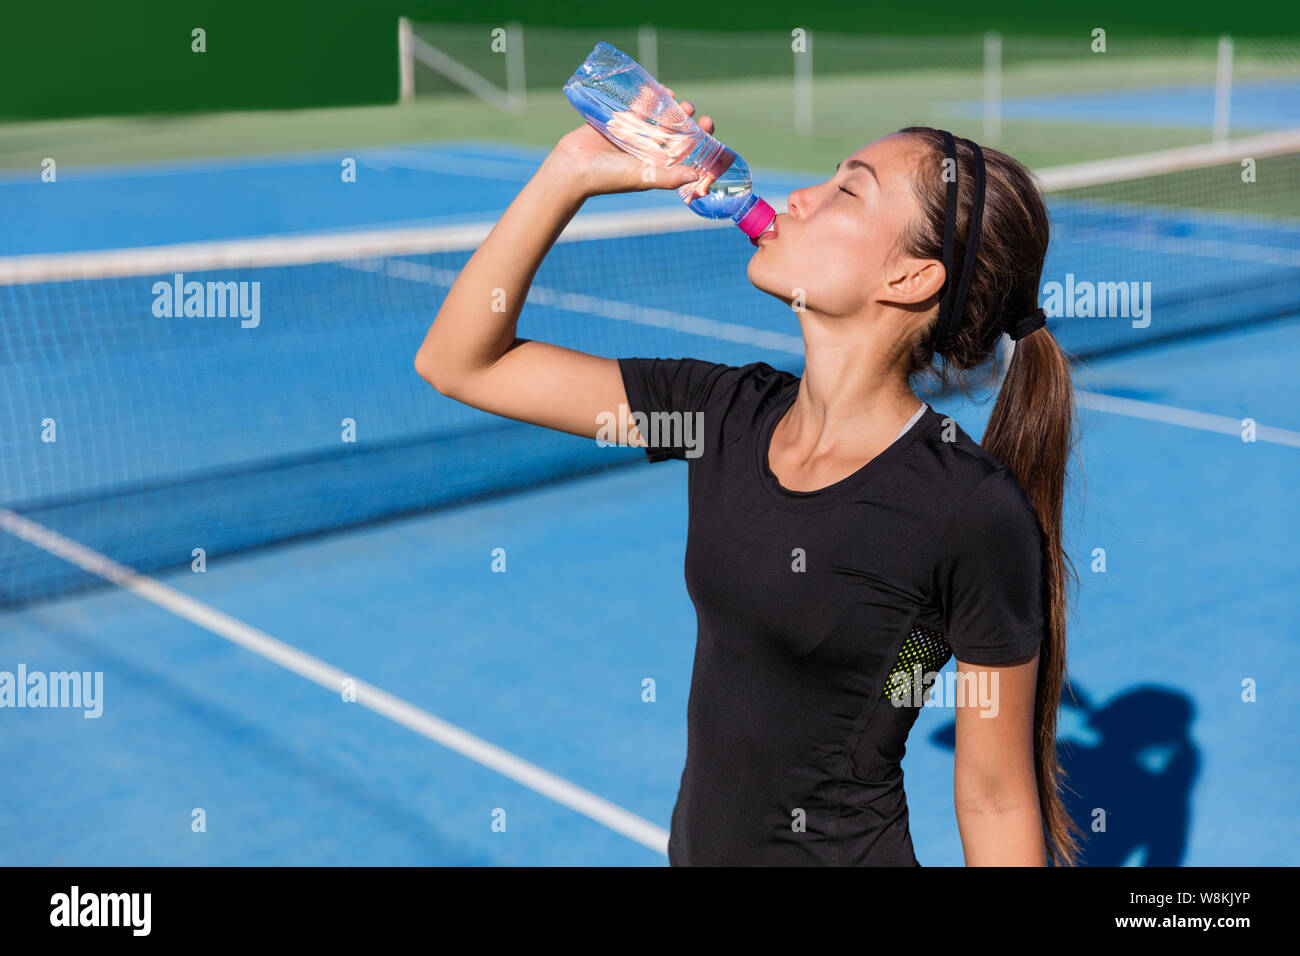 Healthy tennis player thirsty thirst quenching drinking health sports drink water plastic bottle hydrating before playing a game on blue hardcourt. Professional athlete living an active fit lifestyle. Stock Photo